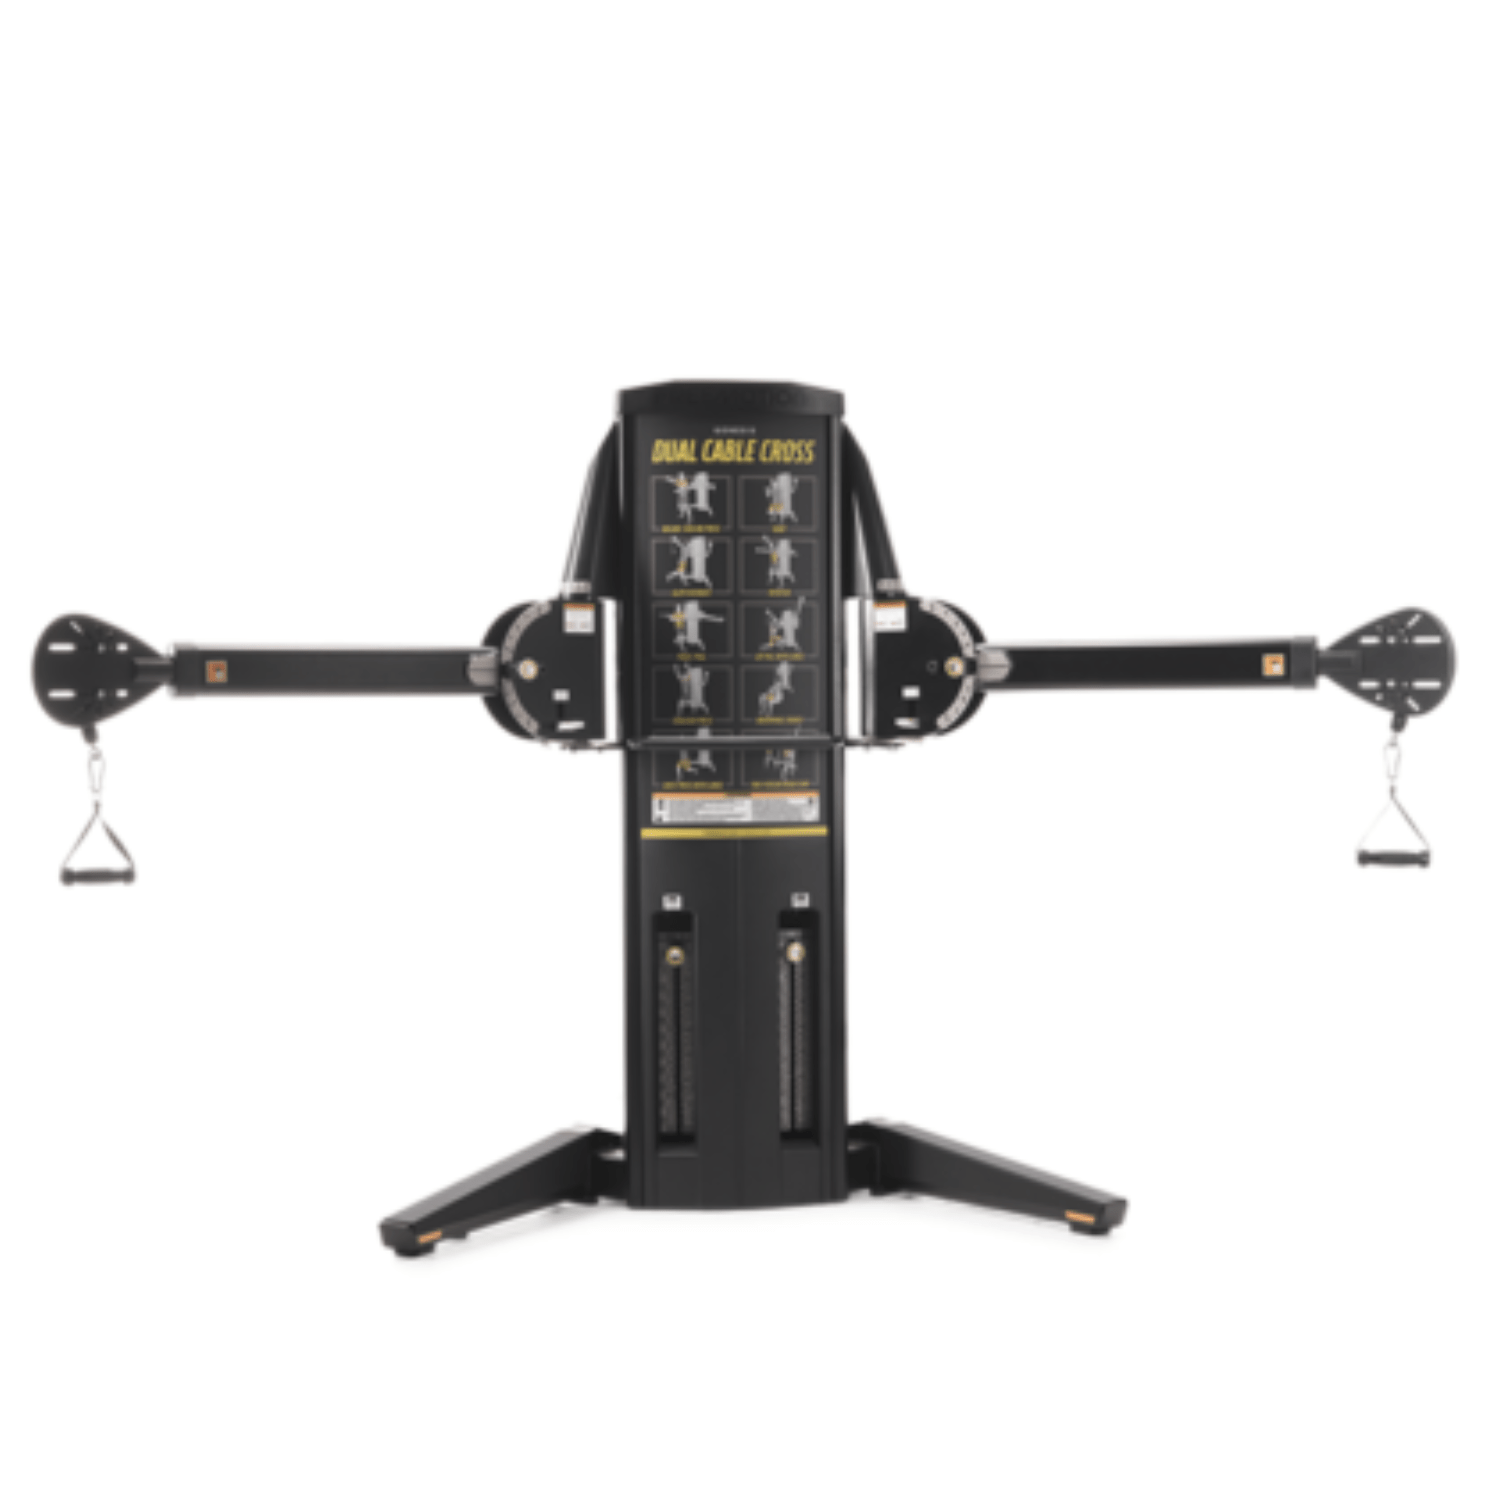 FreeMotion G624 Dual Cable Cross - Functional Trainer - FreeMotion - 2